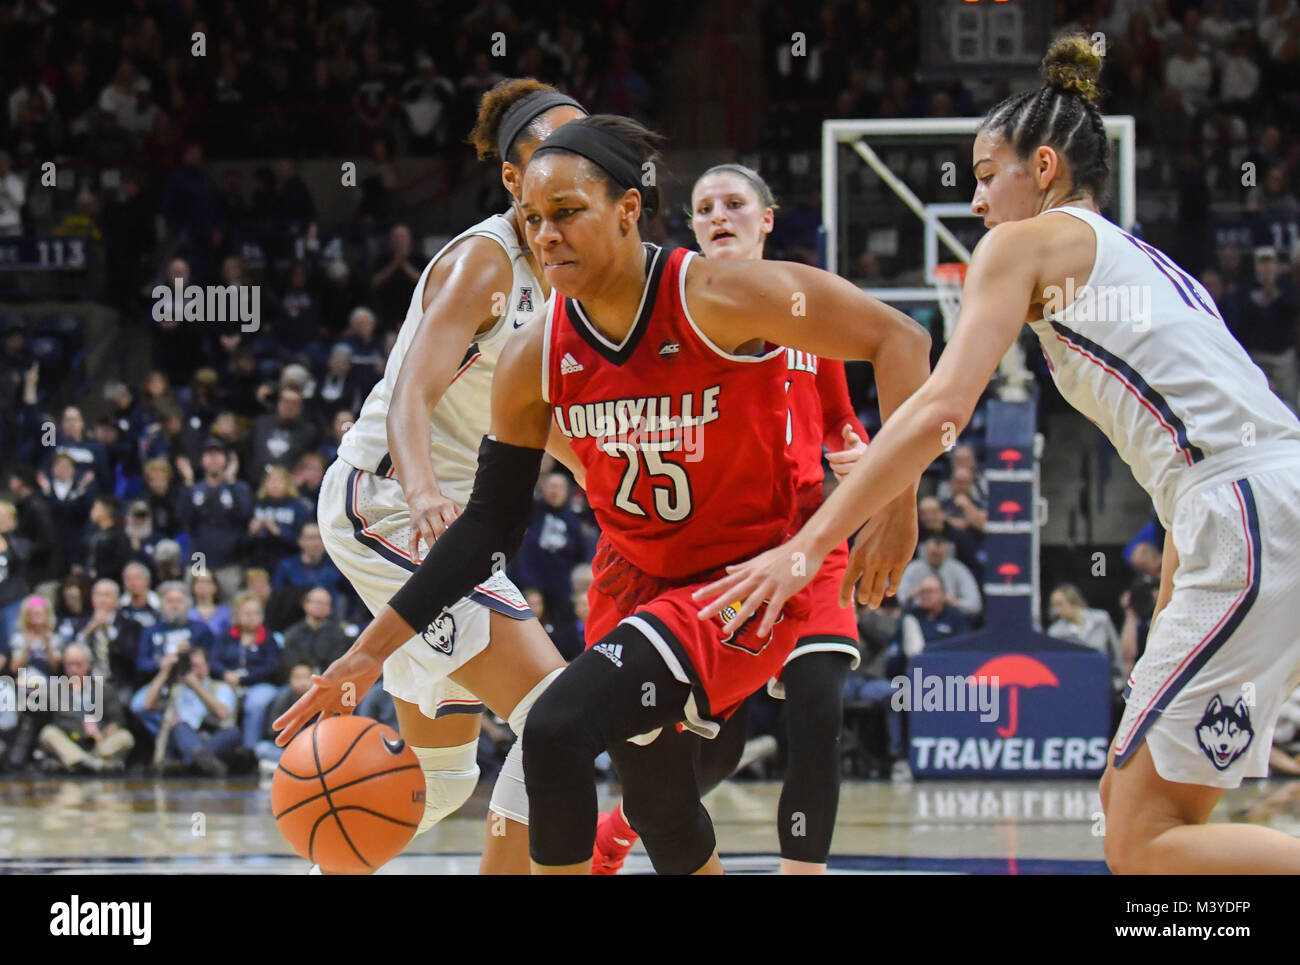 Stores, Connecticut, USA. 12th Feb, 2018. Asia Durr (25) of the Louisville Cardinals drives to the basket during a game against Uconn Huskies at Gampel Pavilion in Stores, Connecticut. Gregory Vasil/Cal Sport Media/Alamy Live News Stock Photo